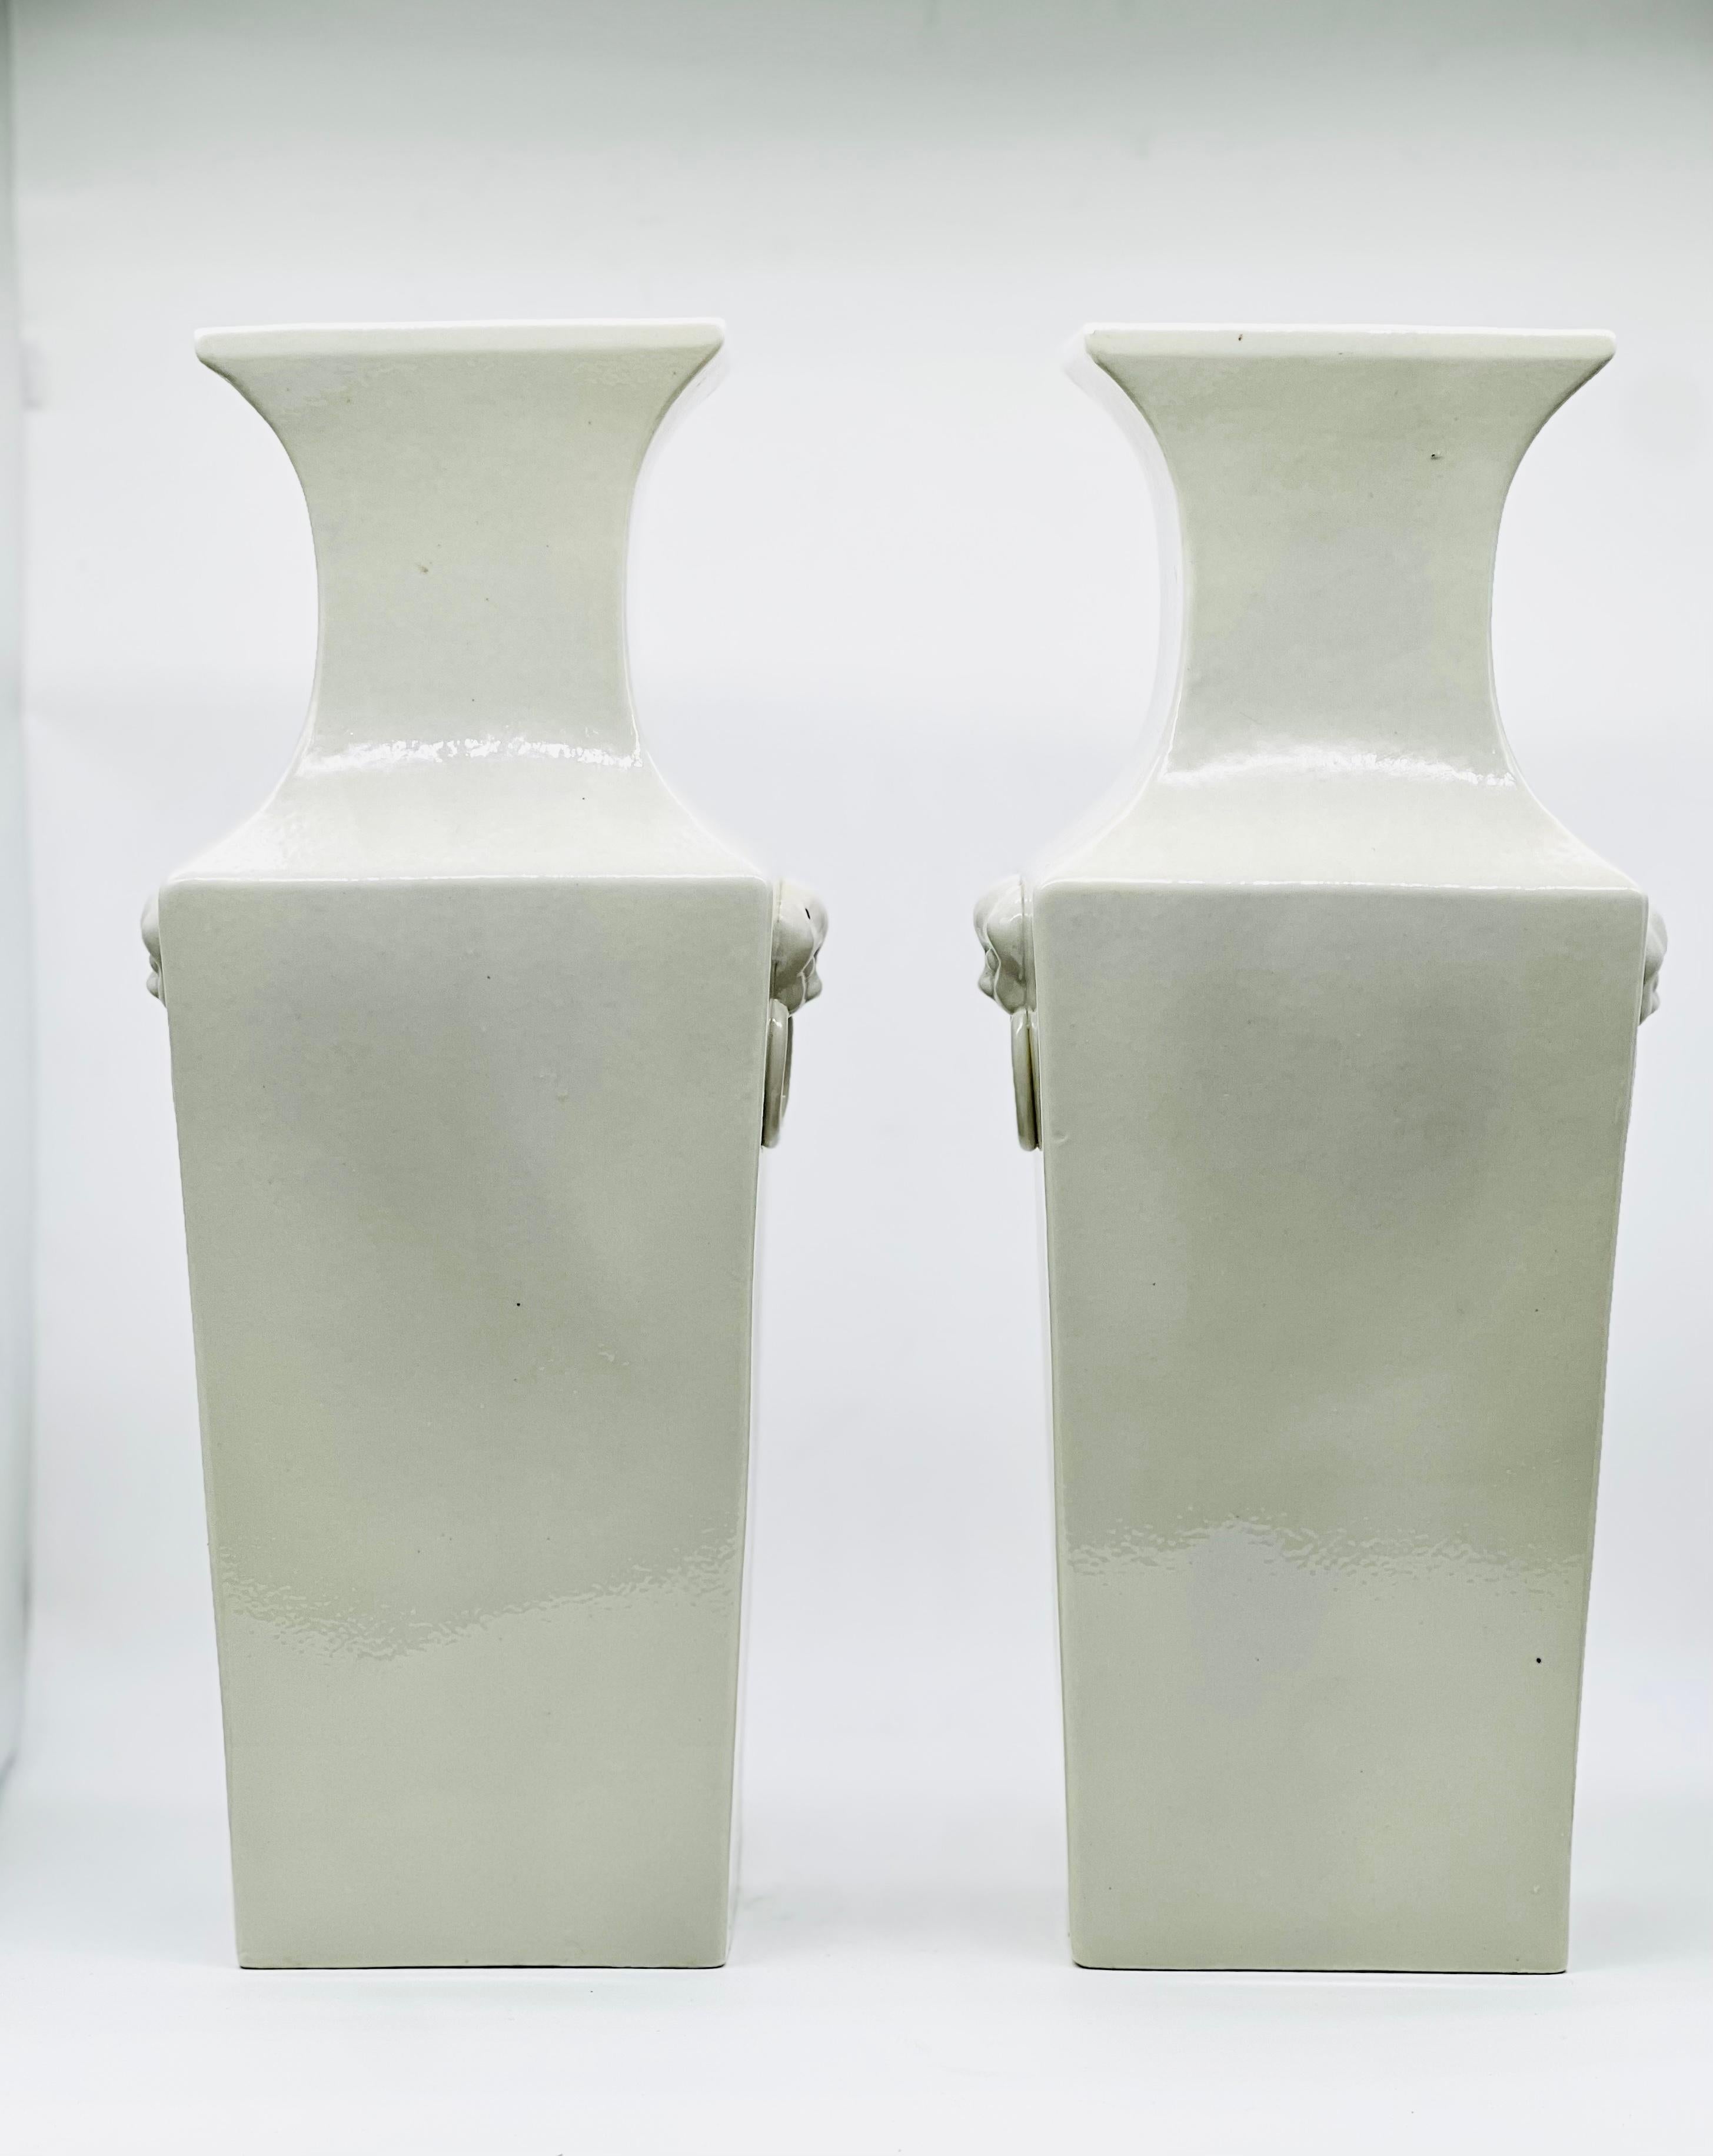 Large Pair of Chinese Blanc De Chine Vases, Republic Period, Early 20th C For Sale 9